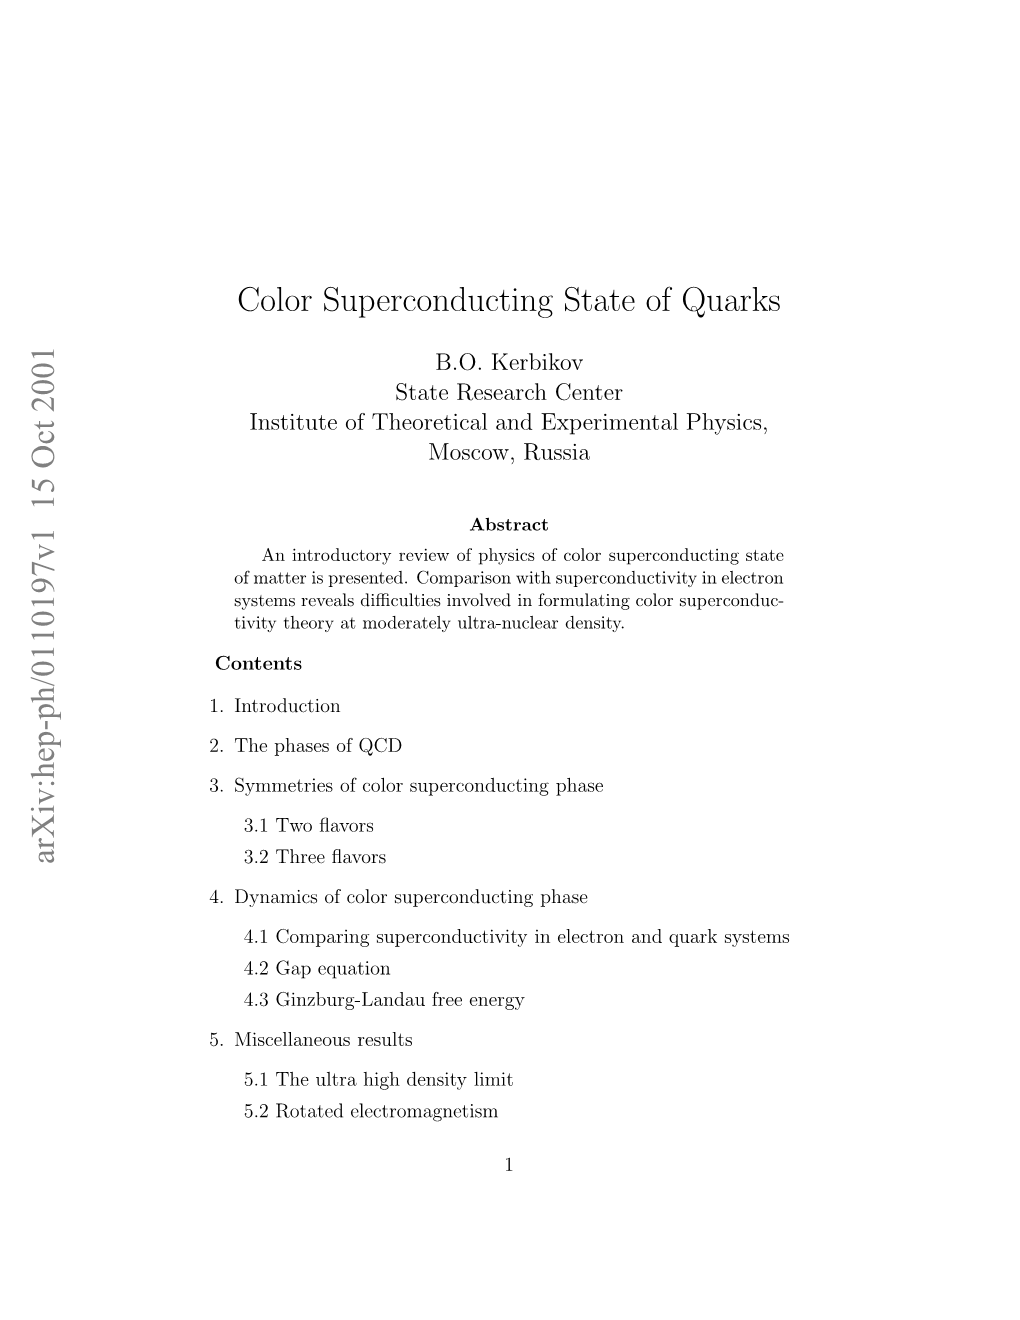 Color Superconducting State of Quarks